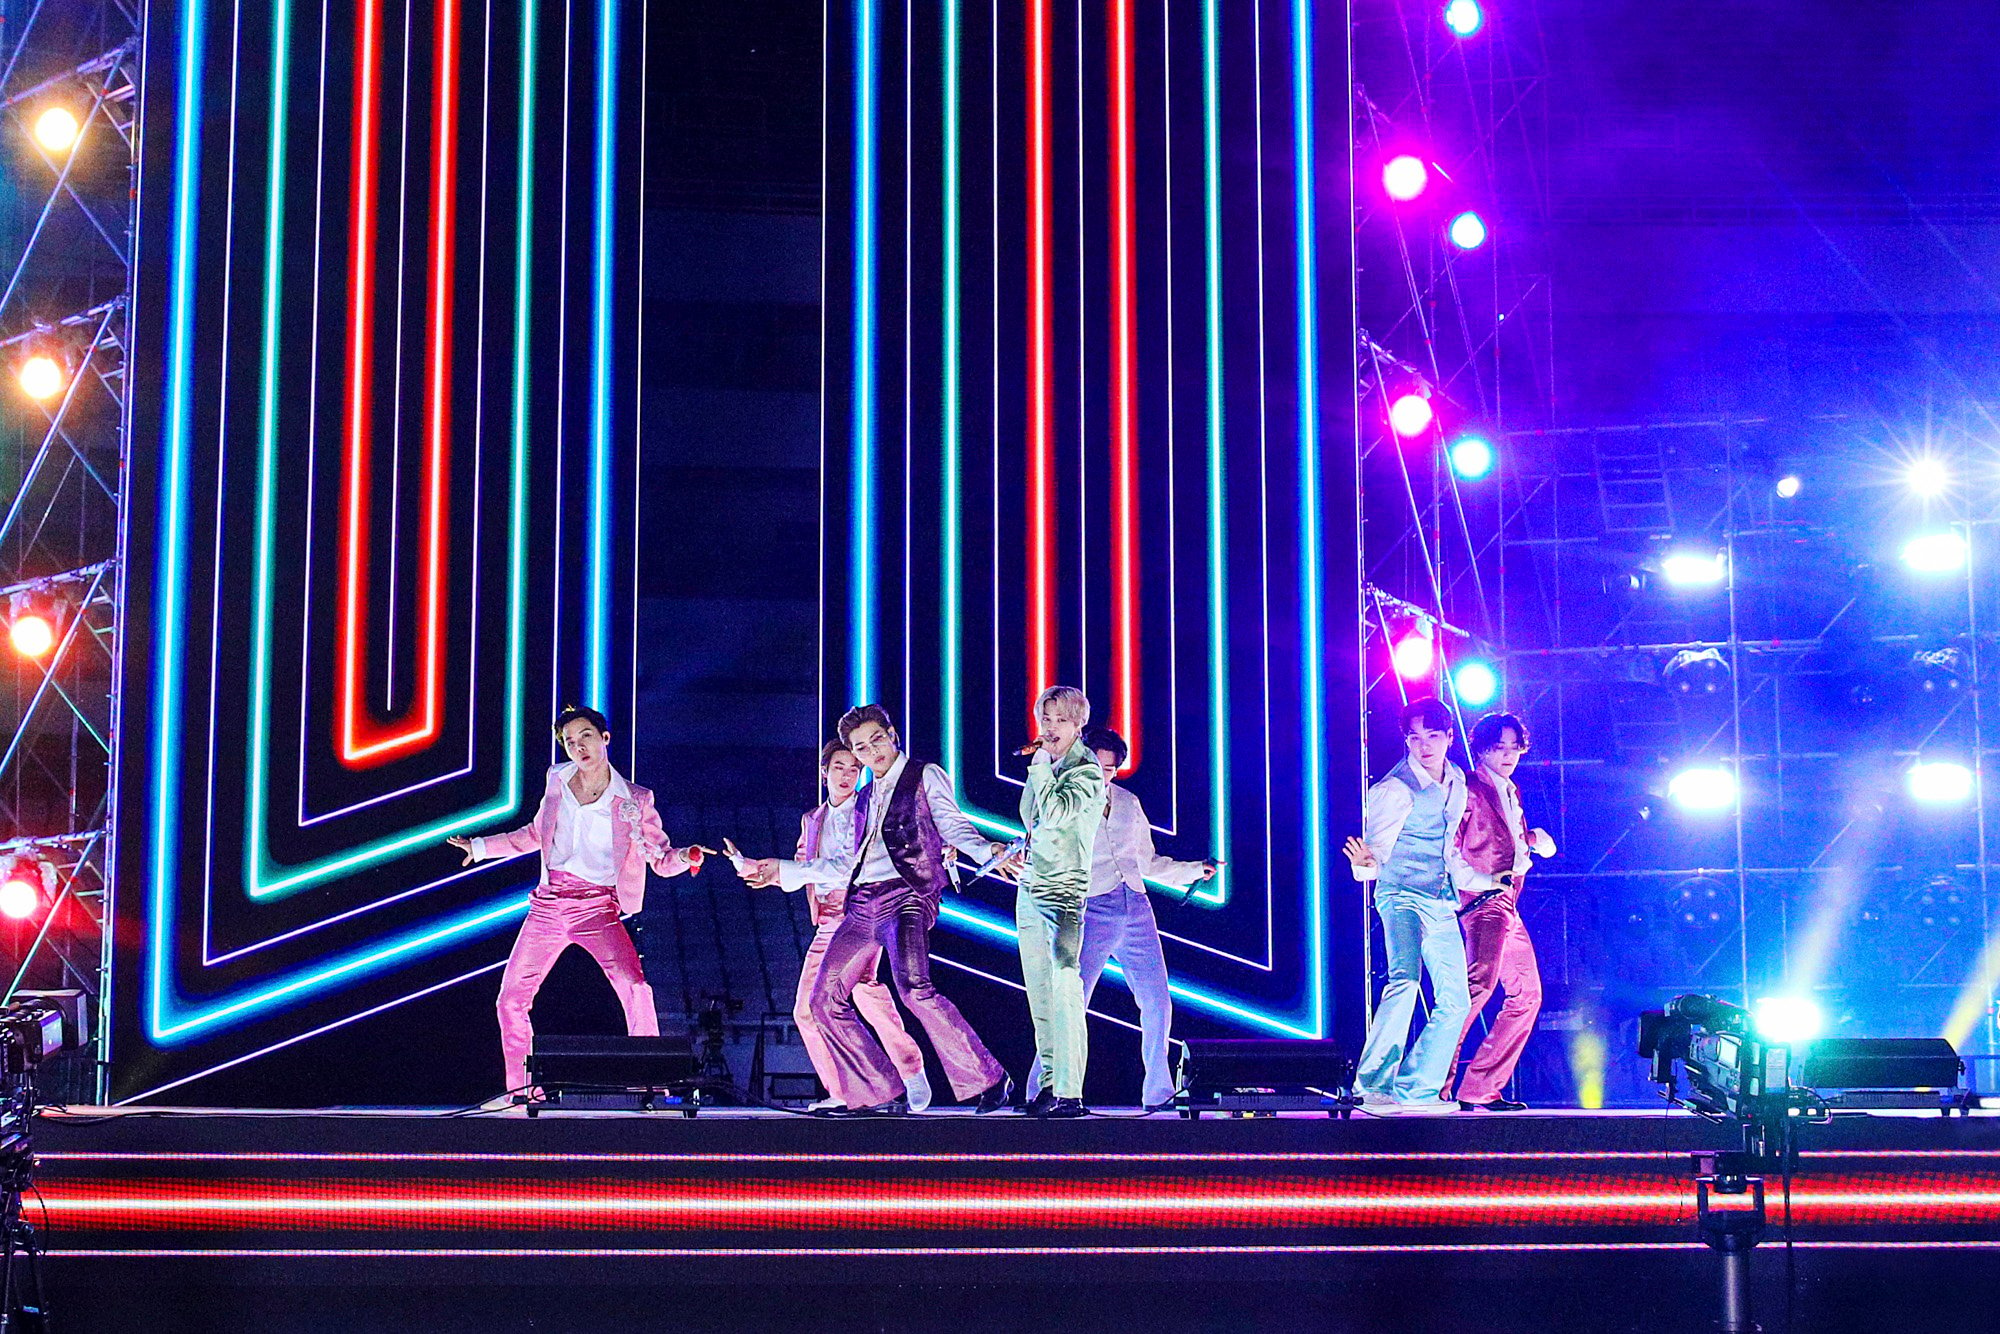 J-Hope, Jin, RM, Jimin, V, Suga, and Jungkook of BTS perform onstage for the 2020 American Music Awards